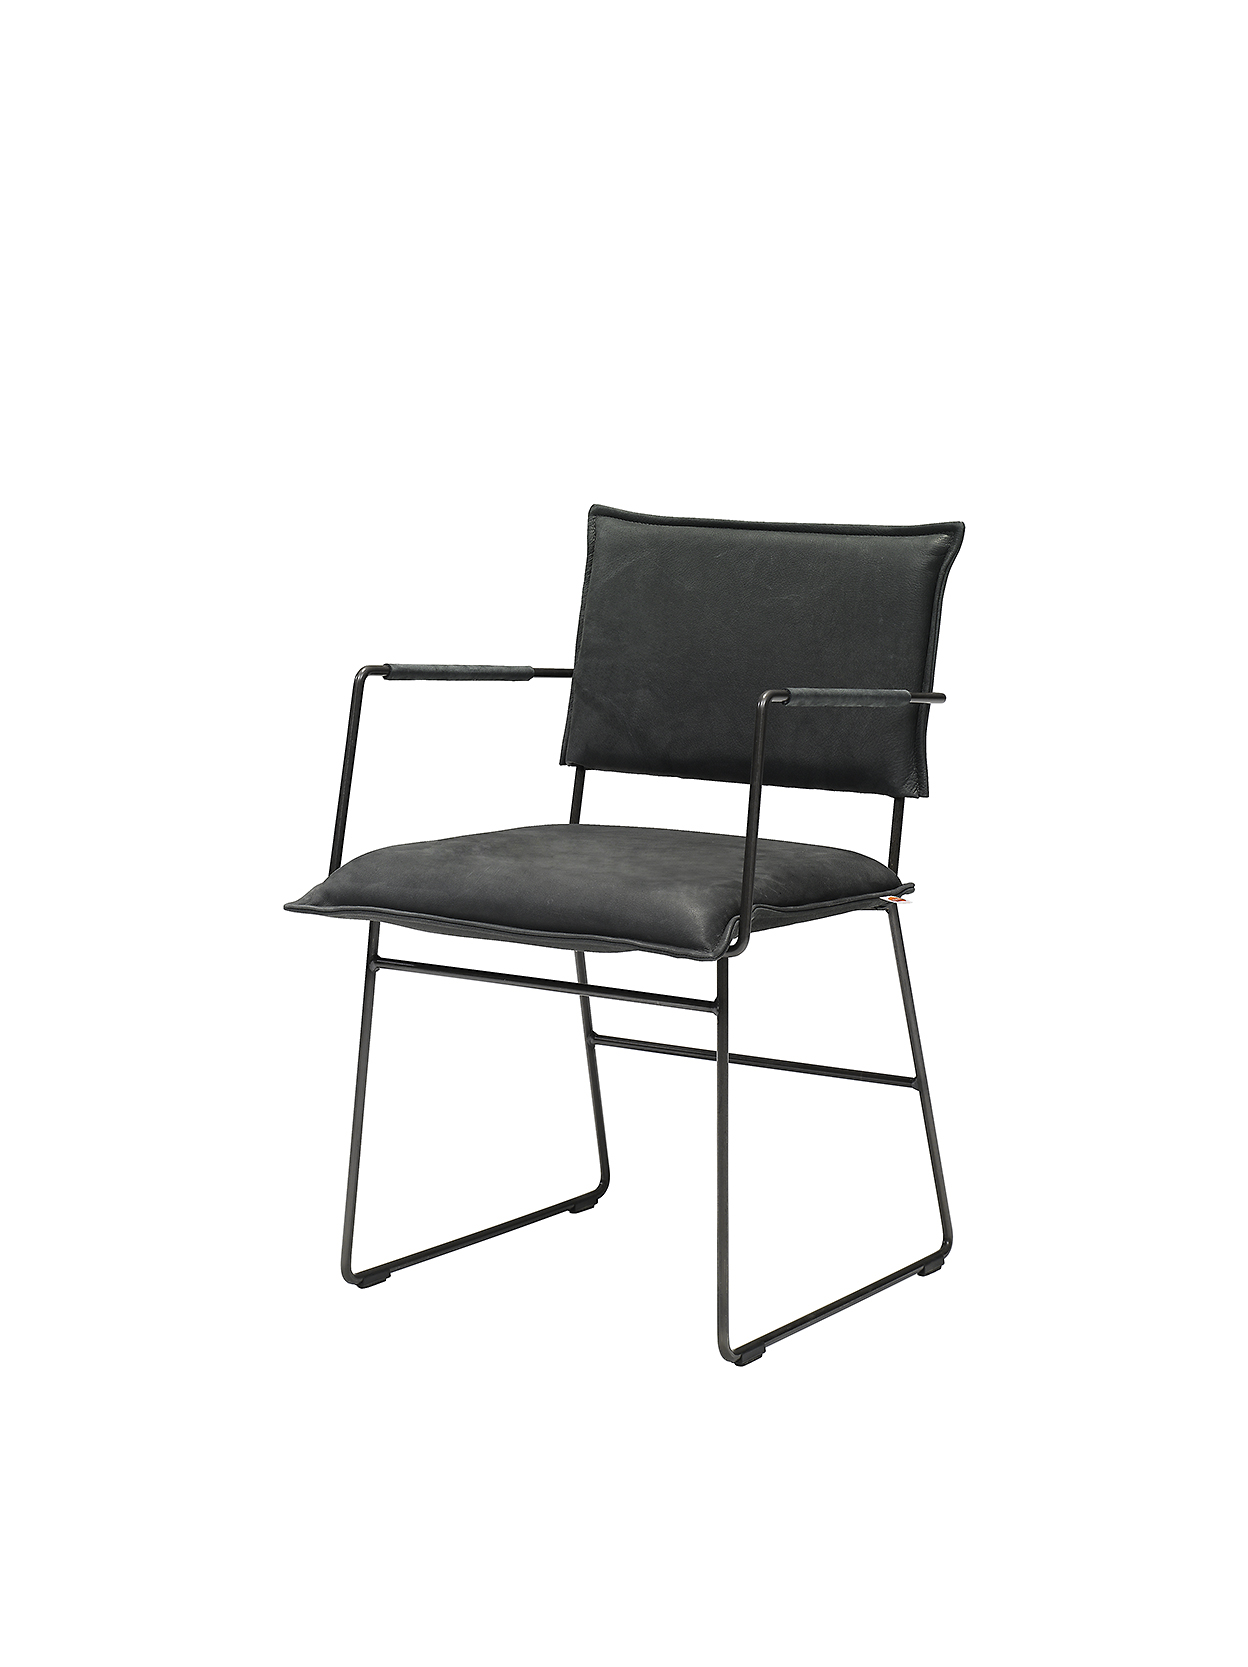 Norman Chair With Arm Aurula Black Pers LR ZS 8720153744485